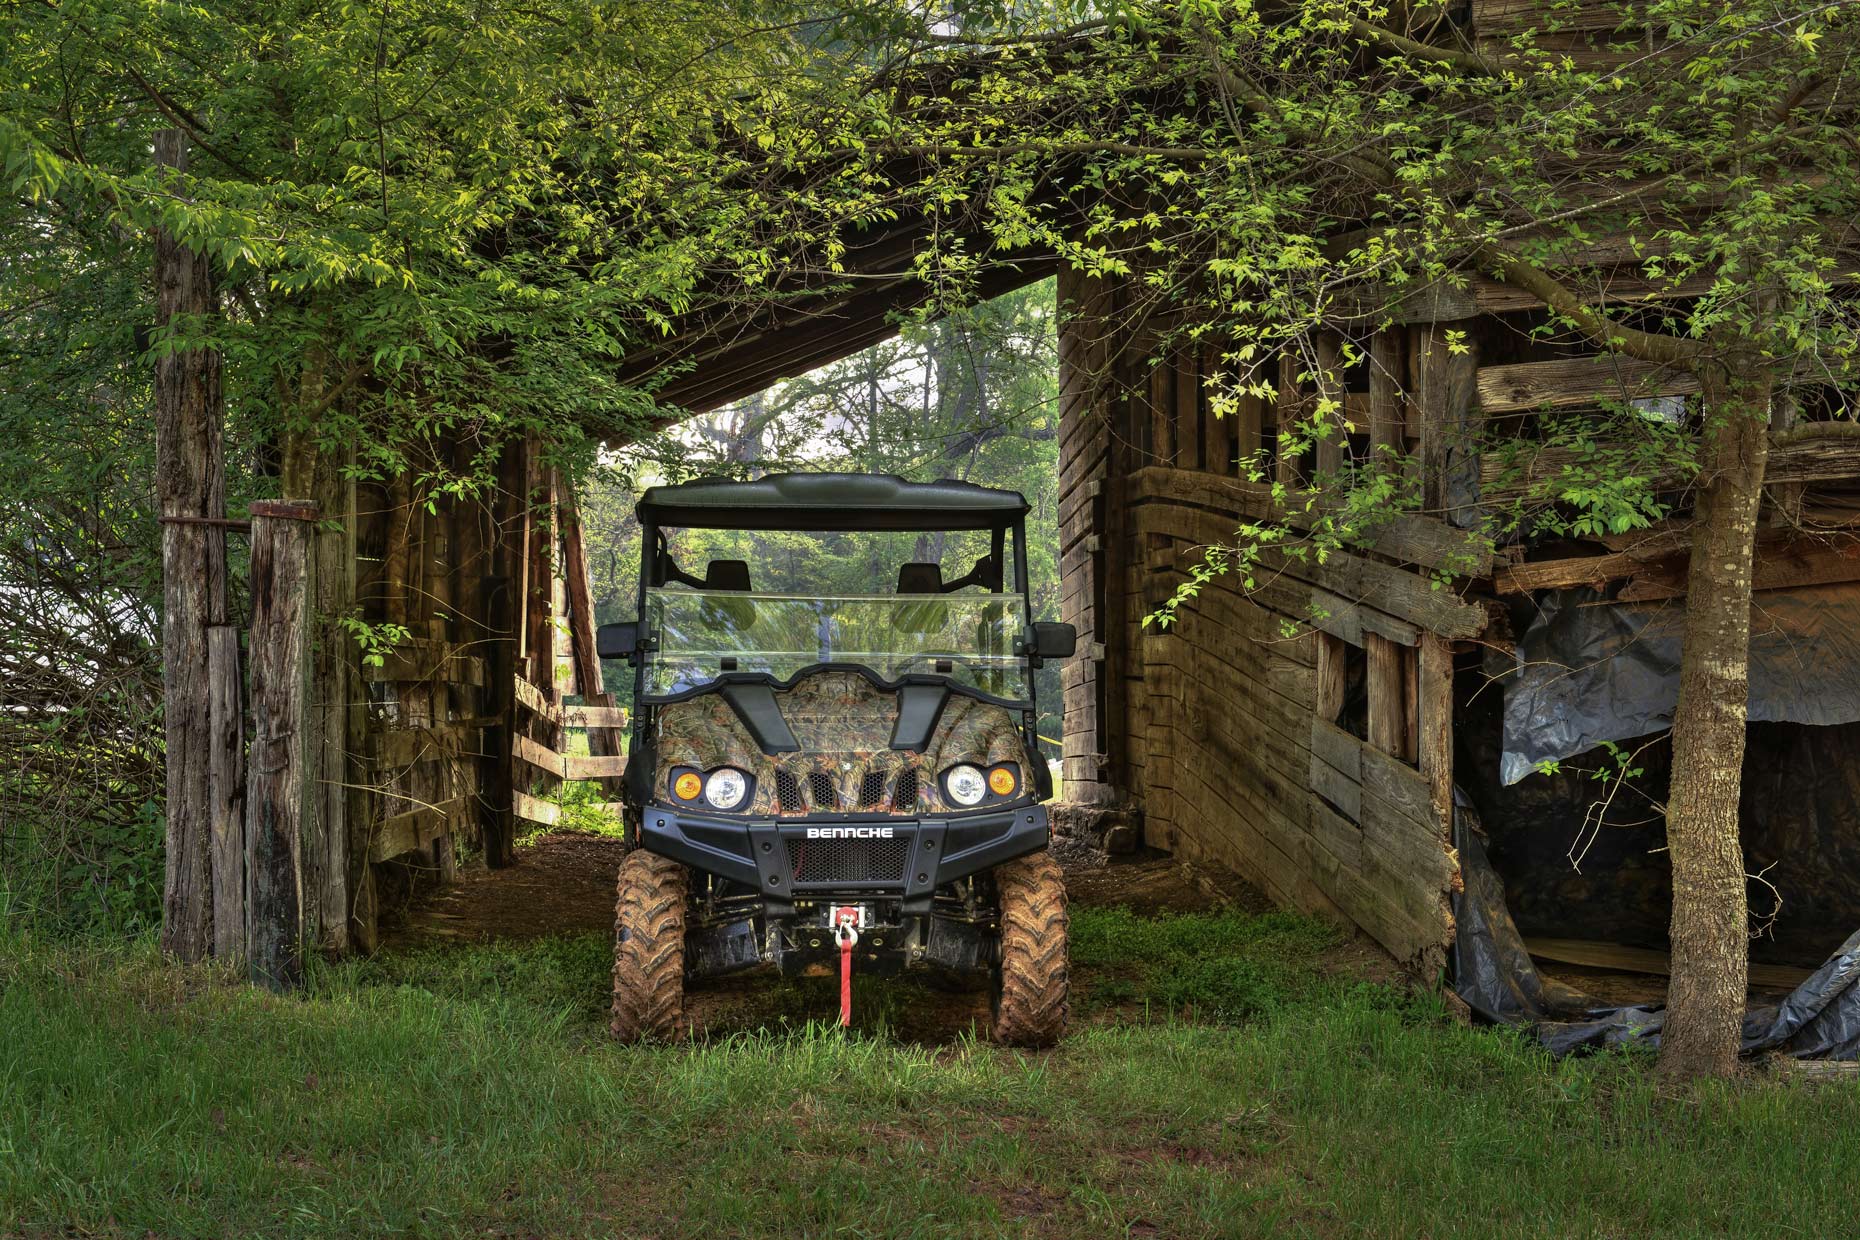 Bennche ATV photography by Dallas photographer Kevin Brown